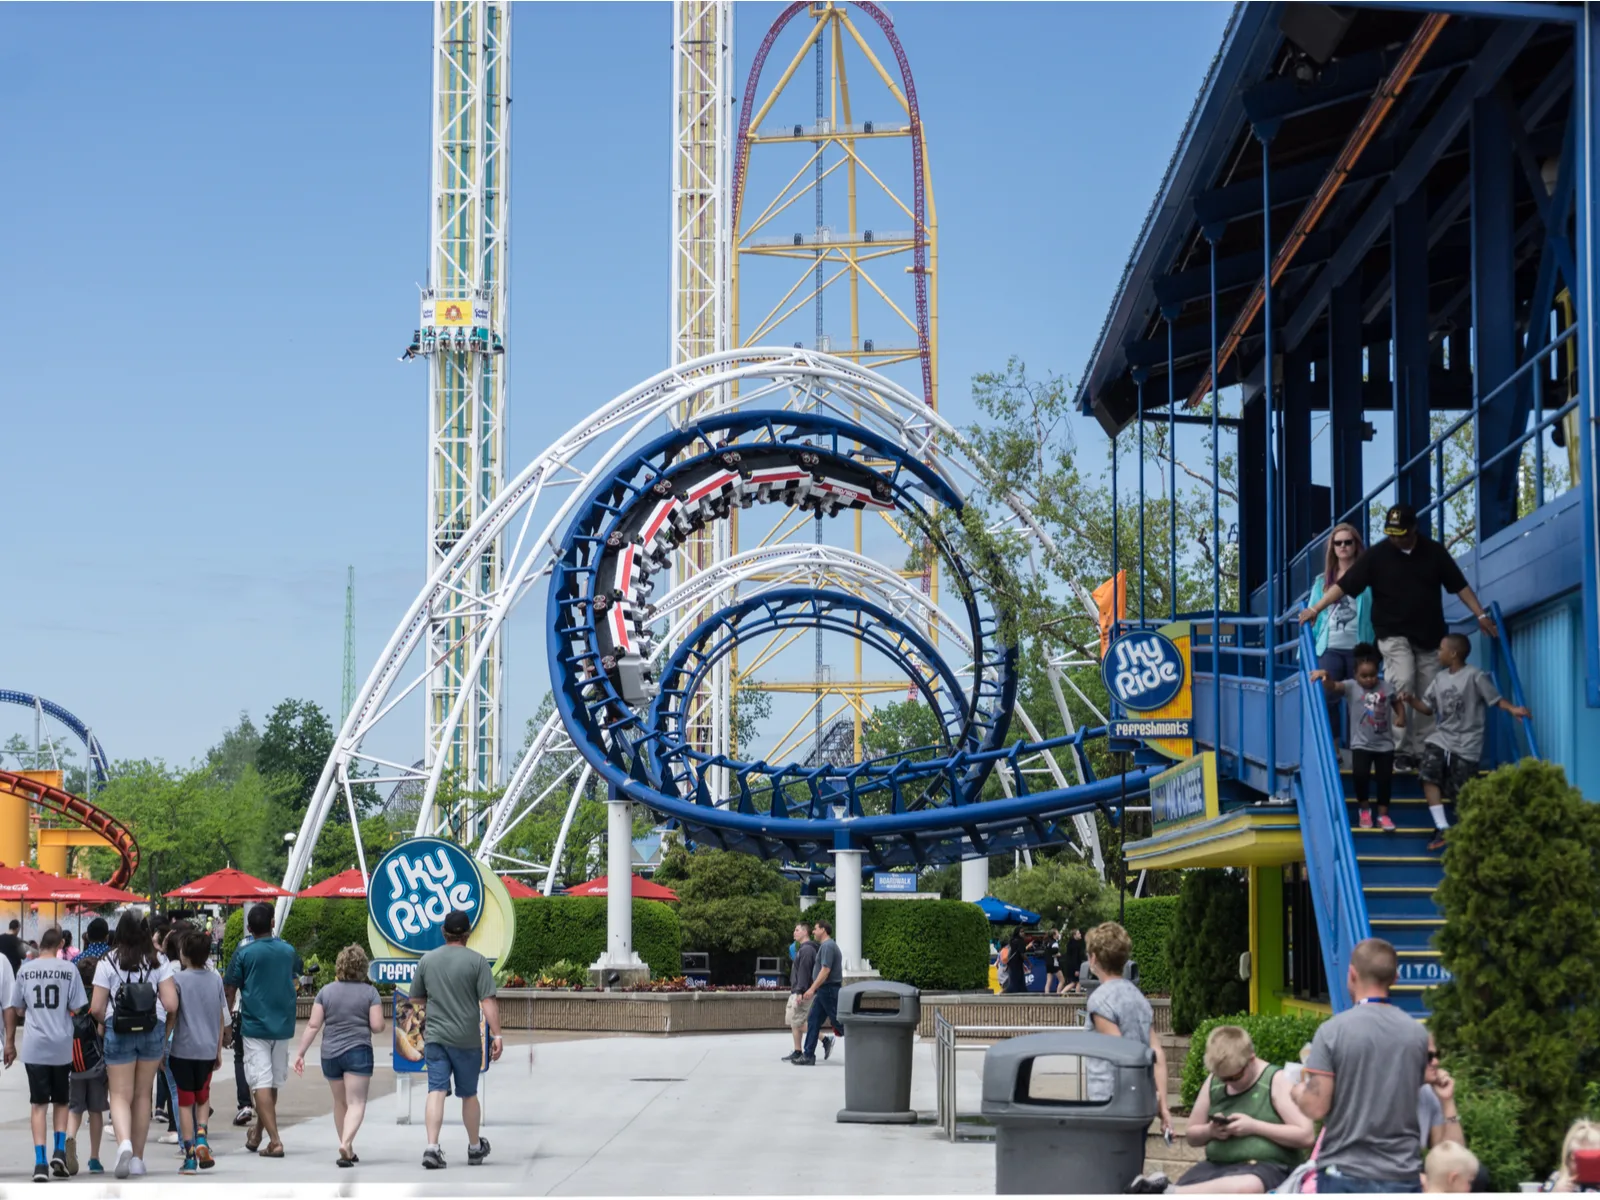 Visitors at Cedar Point in Sandusky, Ohio, considered one of the best roller coaster parks in the US, walk toward the tall Tower Drop and corkscrew Roller Coaster ride